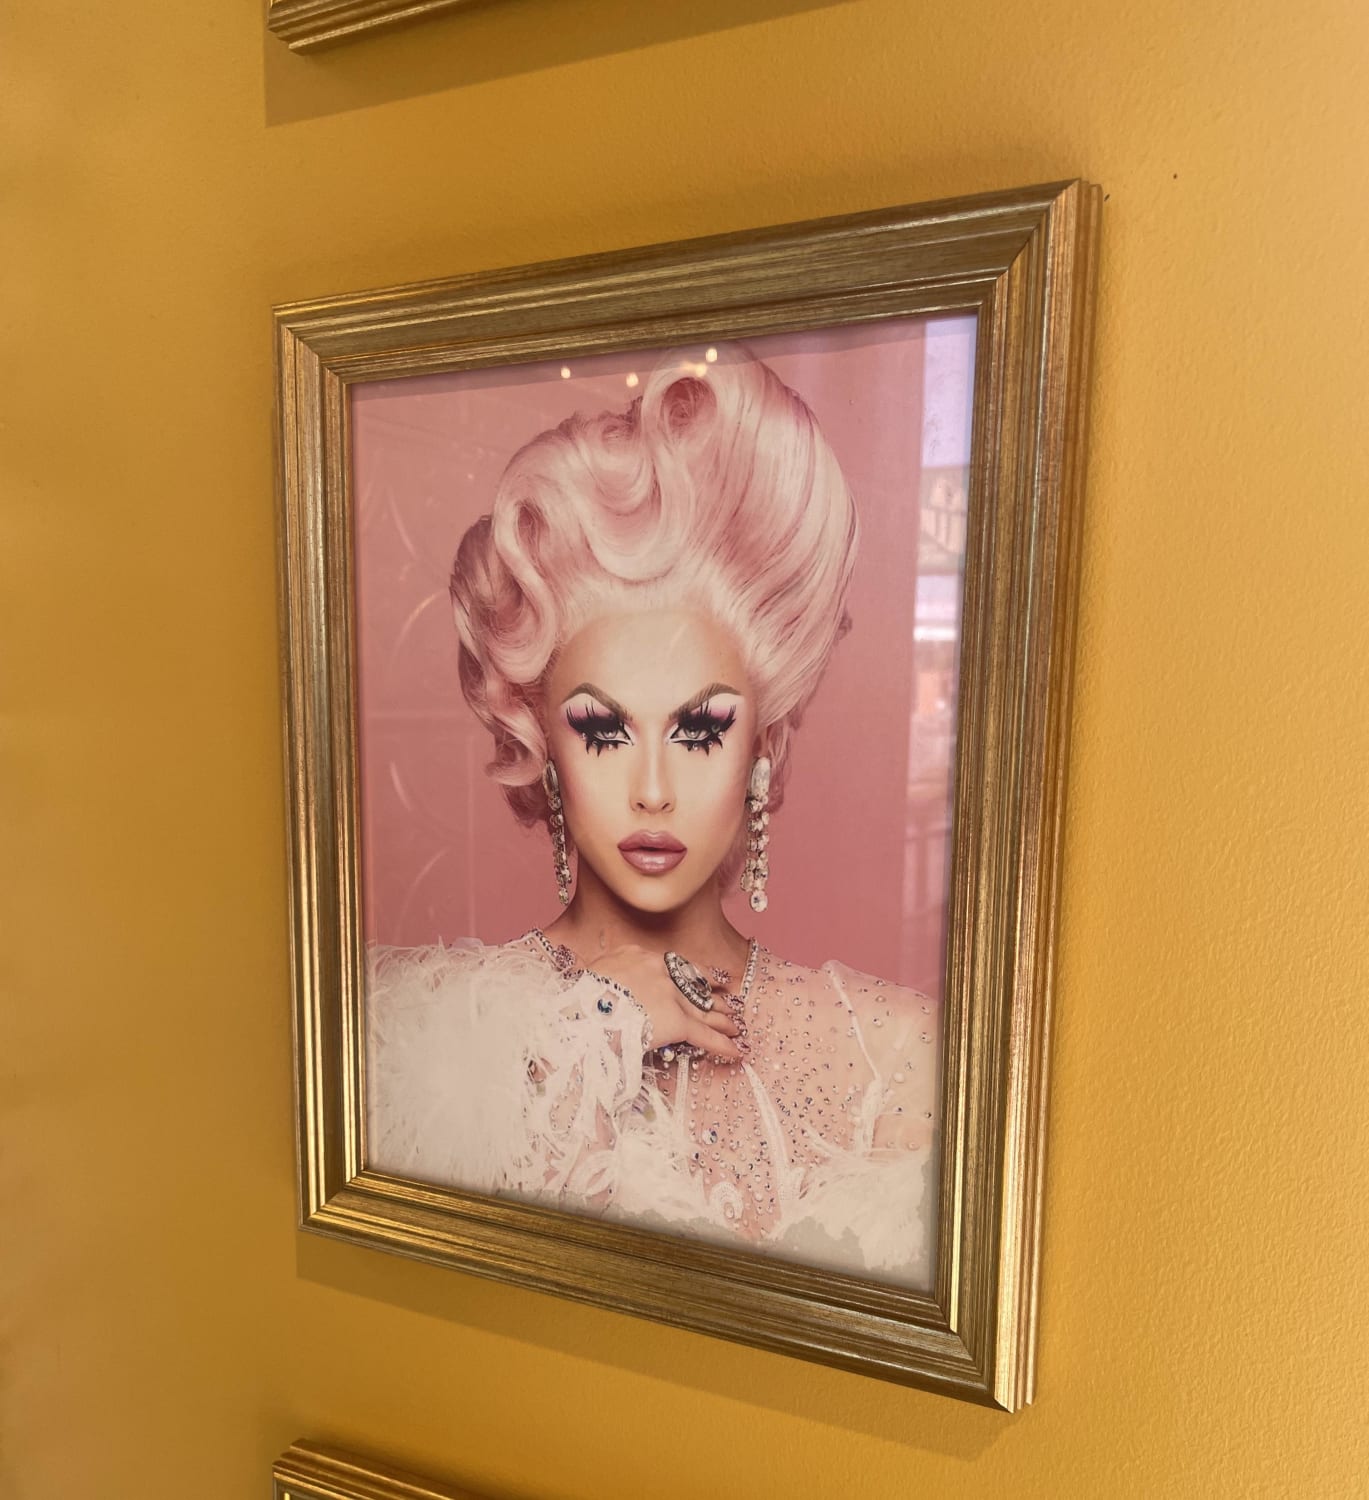 The donut store I was at has a framed picture of Farrah Moan for literally zero reason?